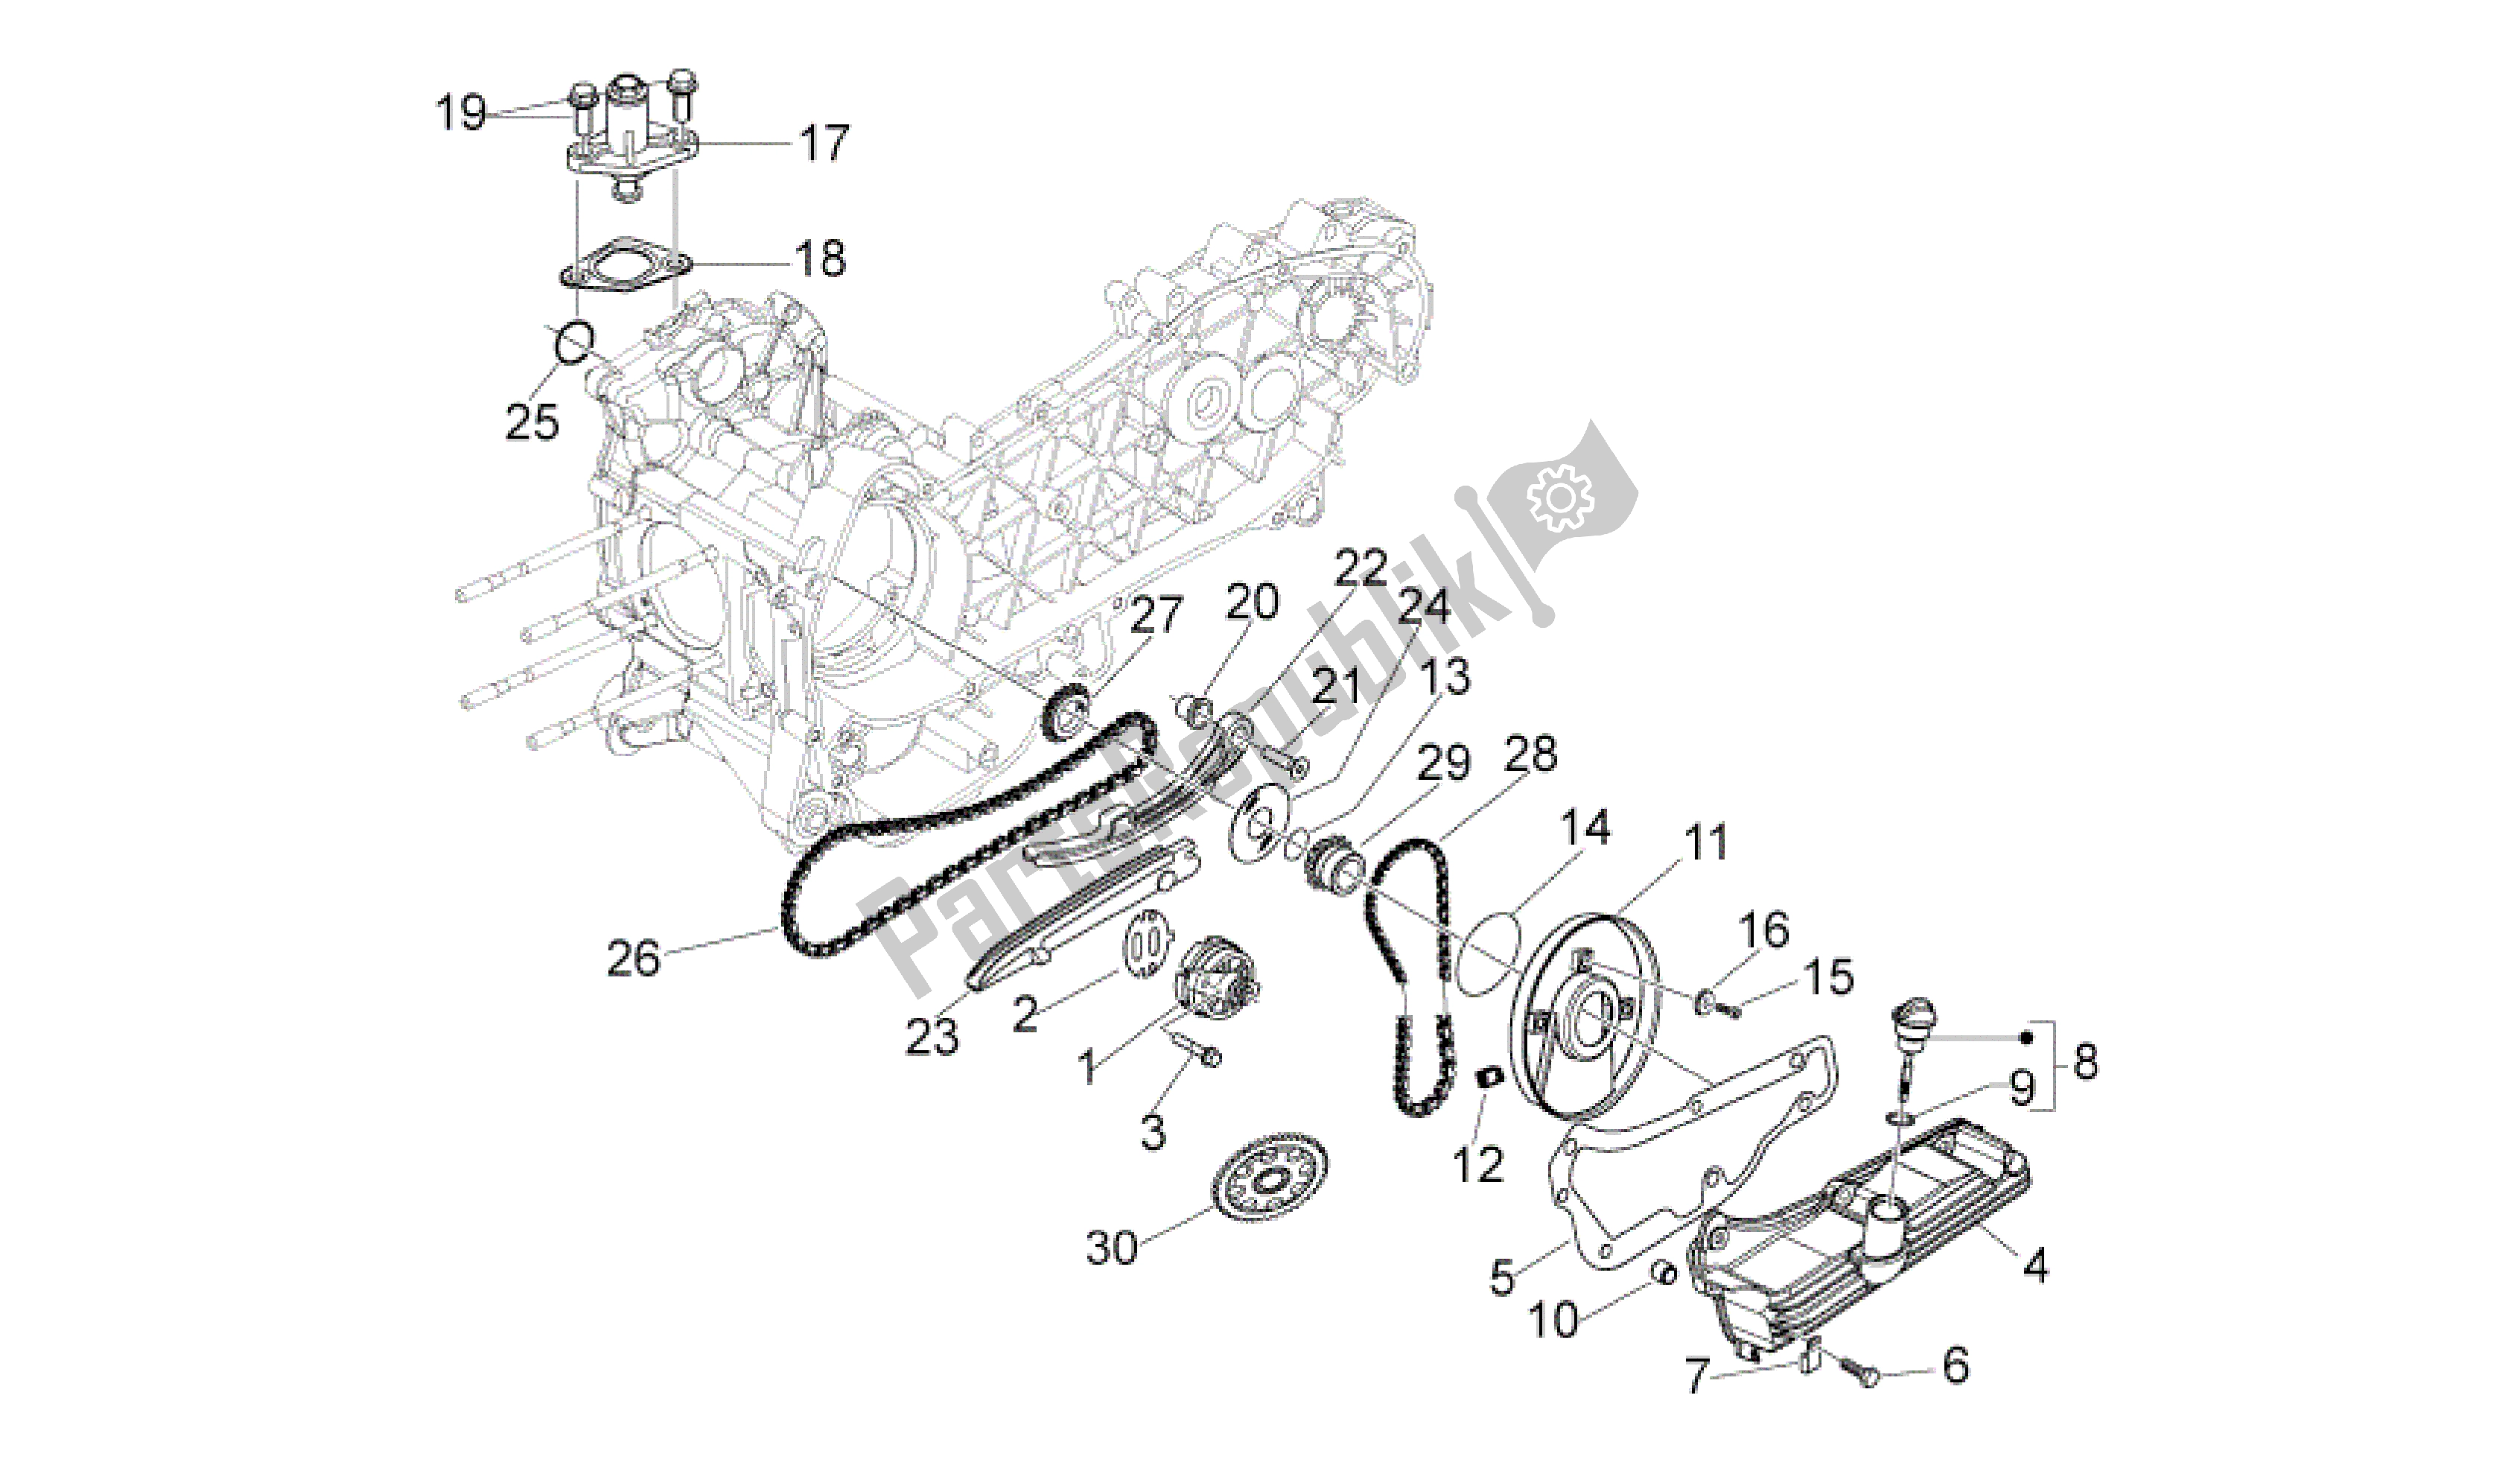 All parts for the Oil Pump of the Aprilia Sport City 125 2008 - 2010